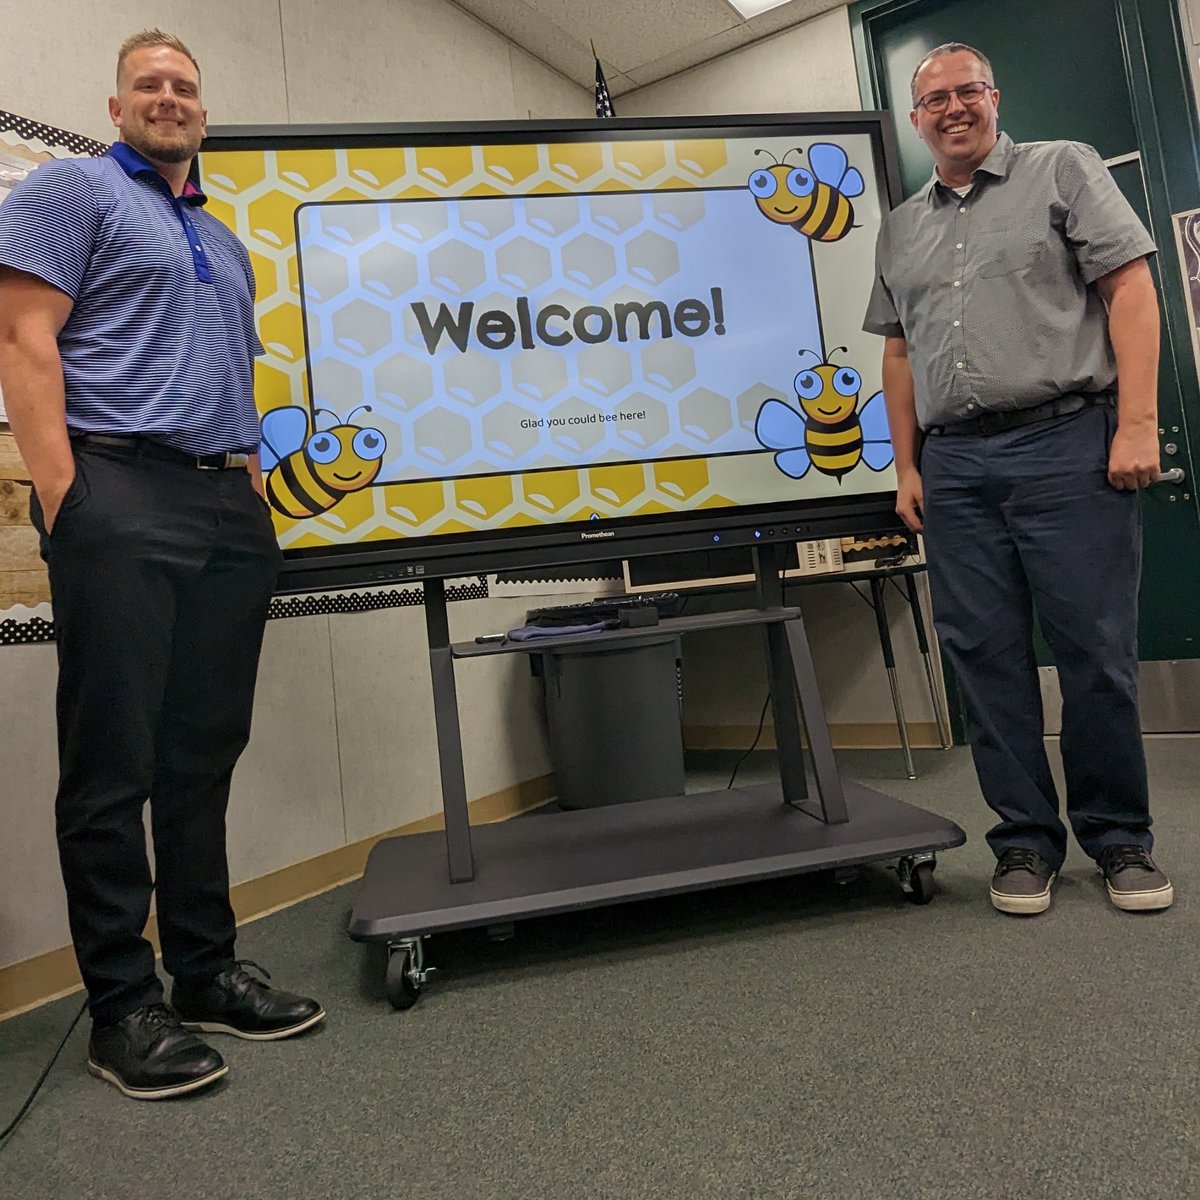 We start the new year with a new battery! Welcome to our new principal and assistant principal. #wearepbv #twentyfirstyear @vanhornhornets